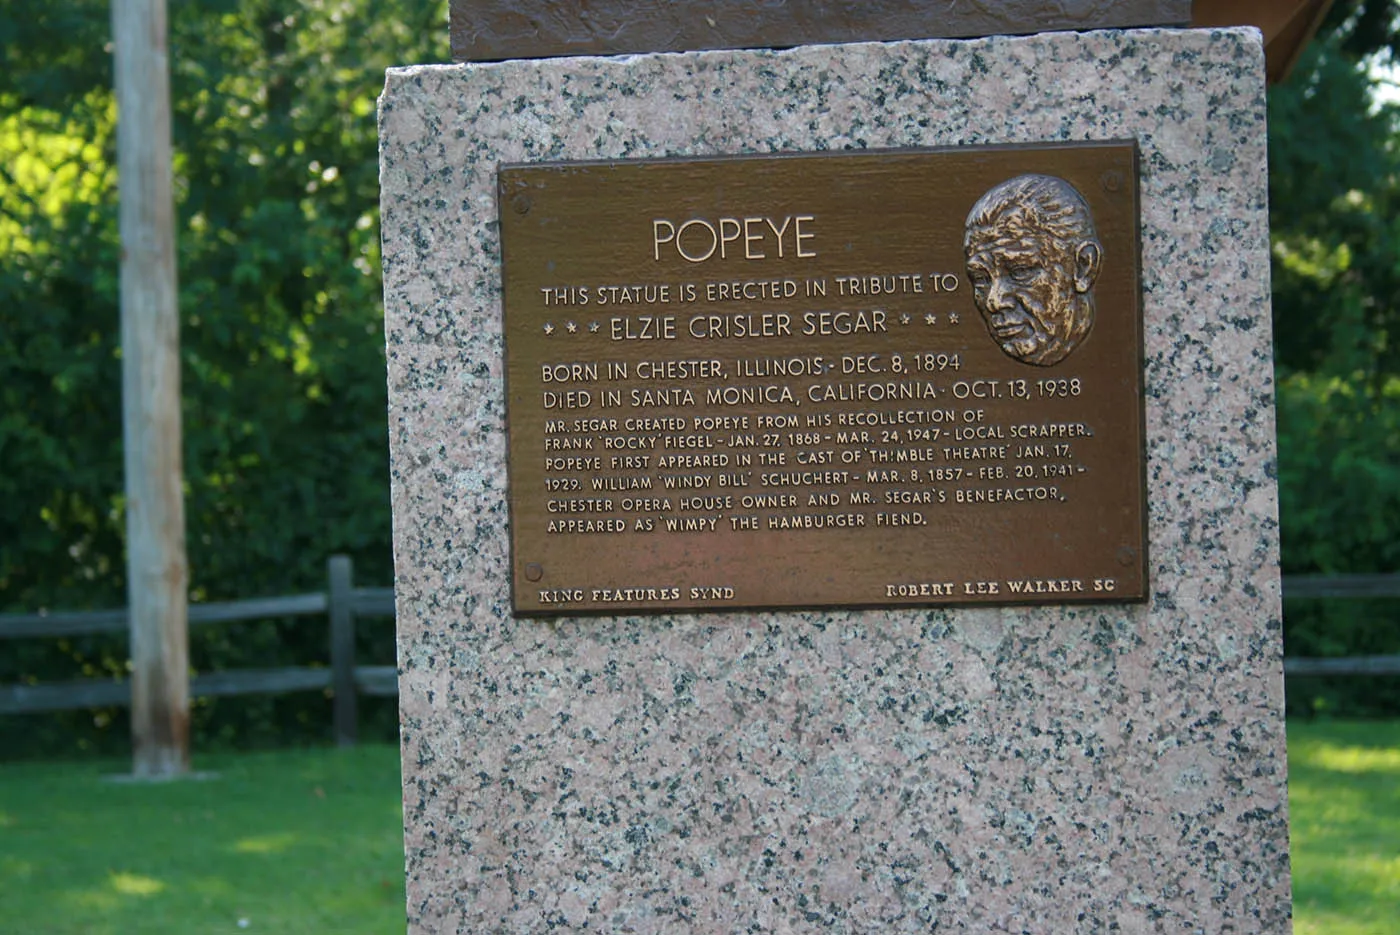 Popeye statue in Chester, Illinois | Home of Popeye the Sailor Man